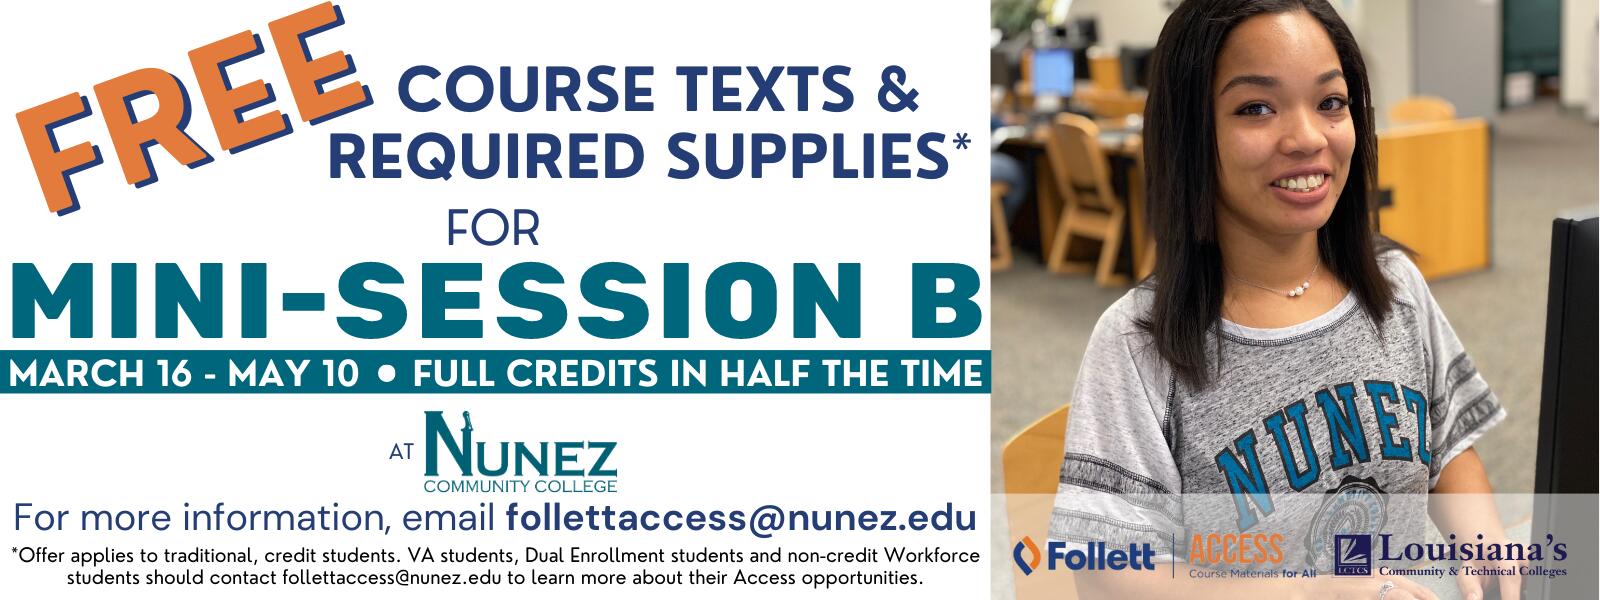 Only for Spring 2023 - Free Course Texts and Required Supplies with Follett Access at Nunez: Click Here to Learn More